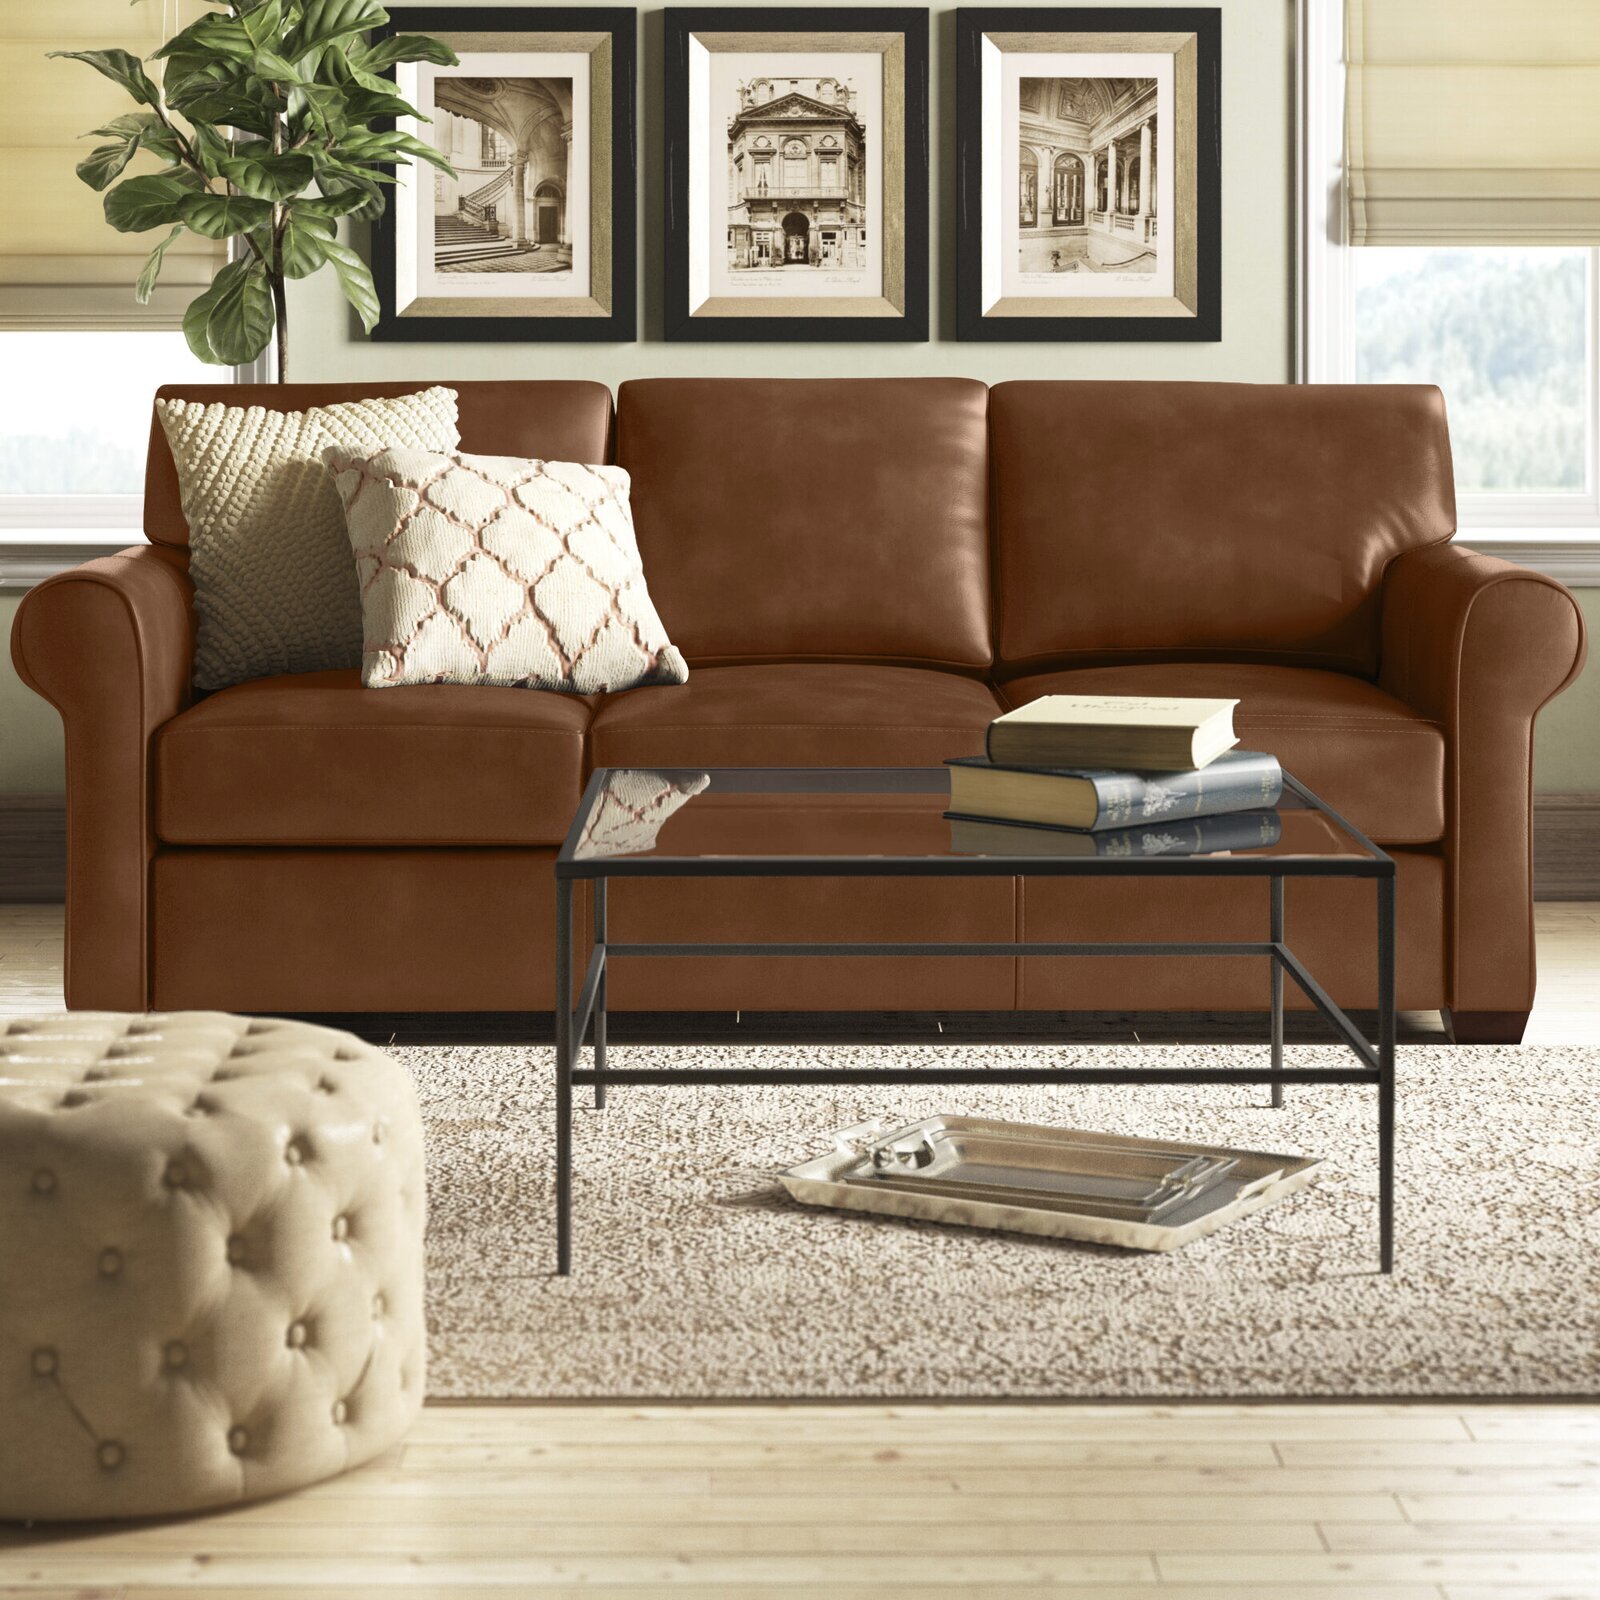 Rachel 91” Genuine Leather Rolled Arm Sofa Bed